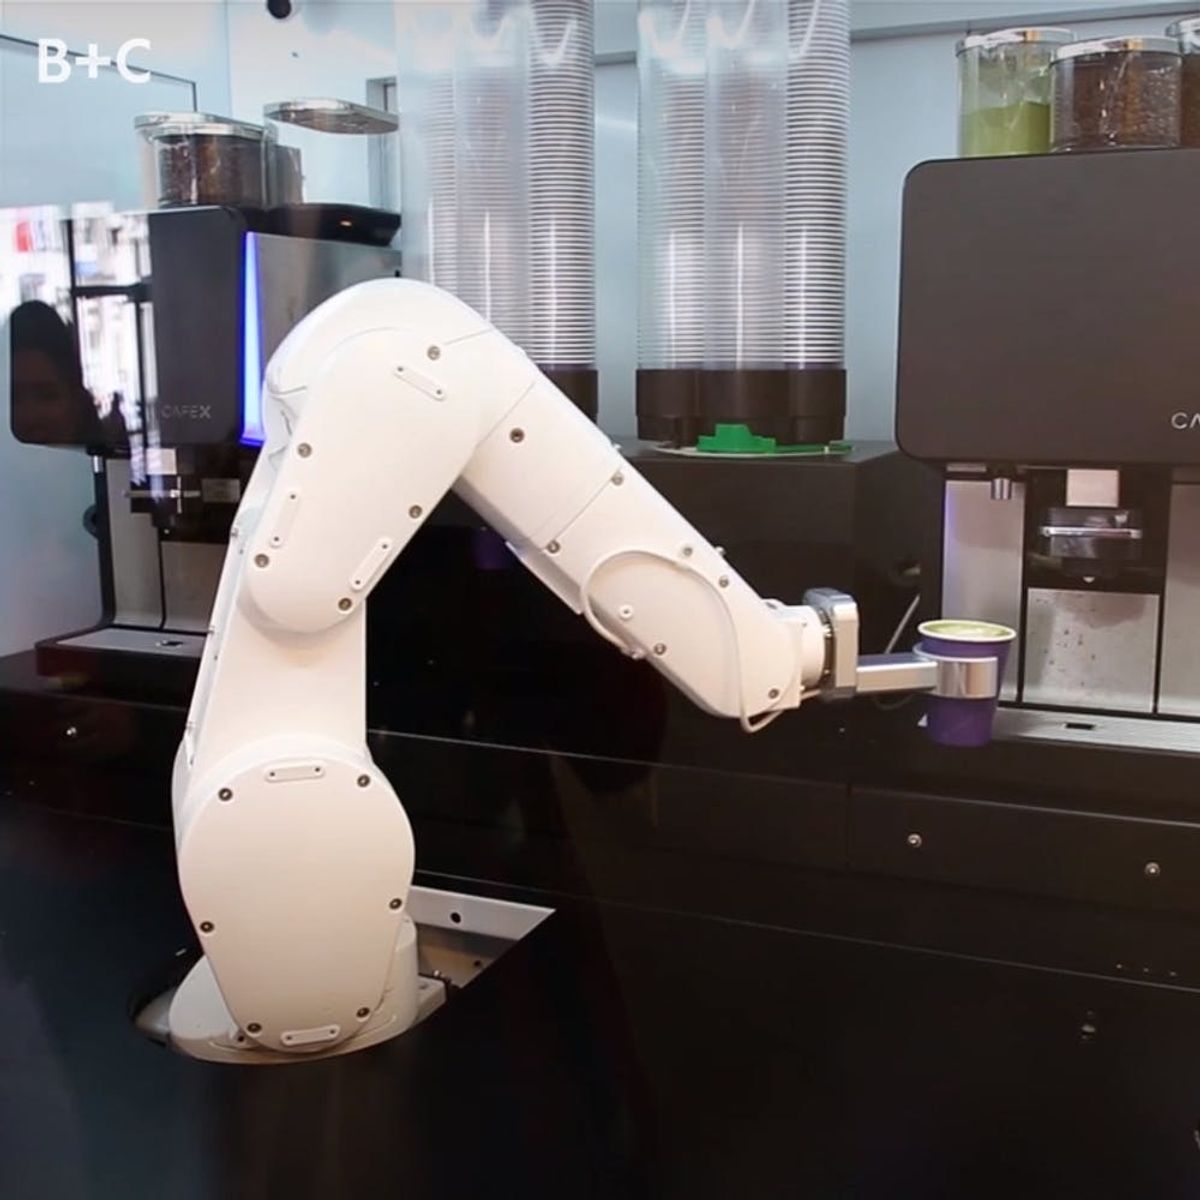 This Cafe Uses Robots to Serve Coffee